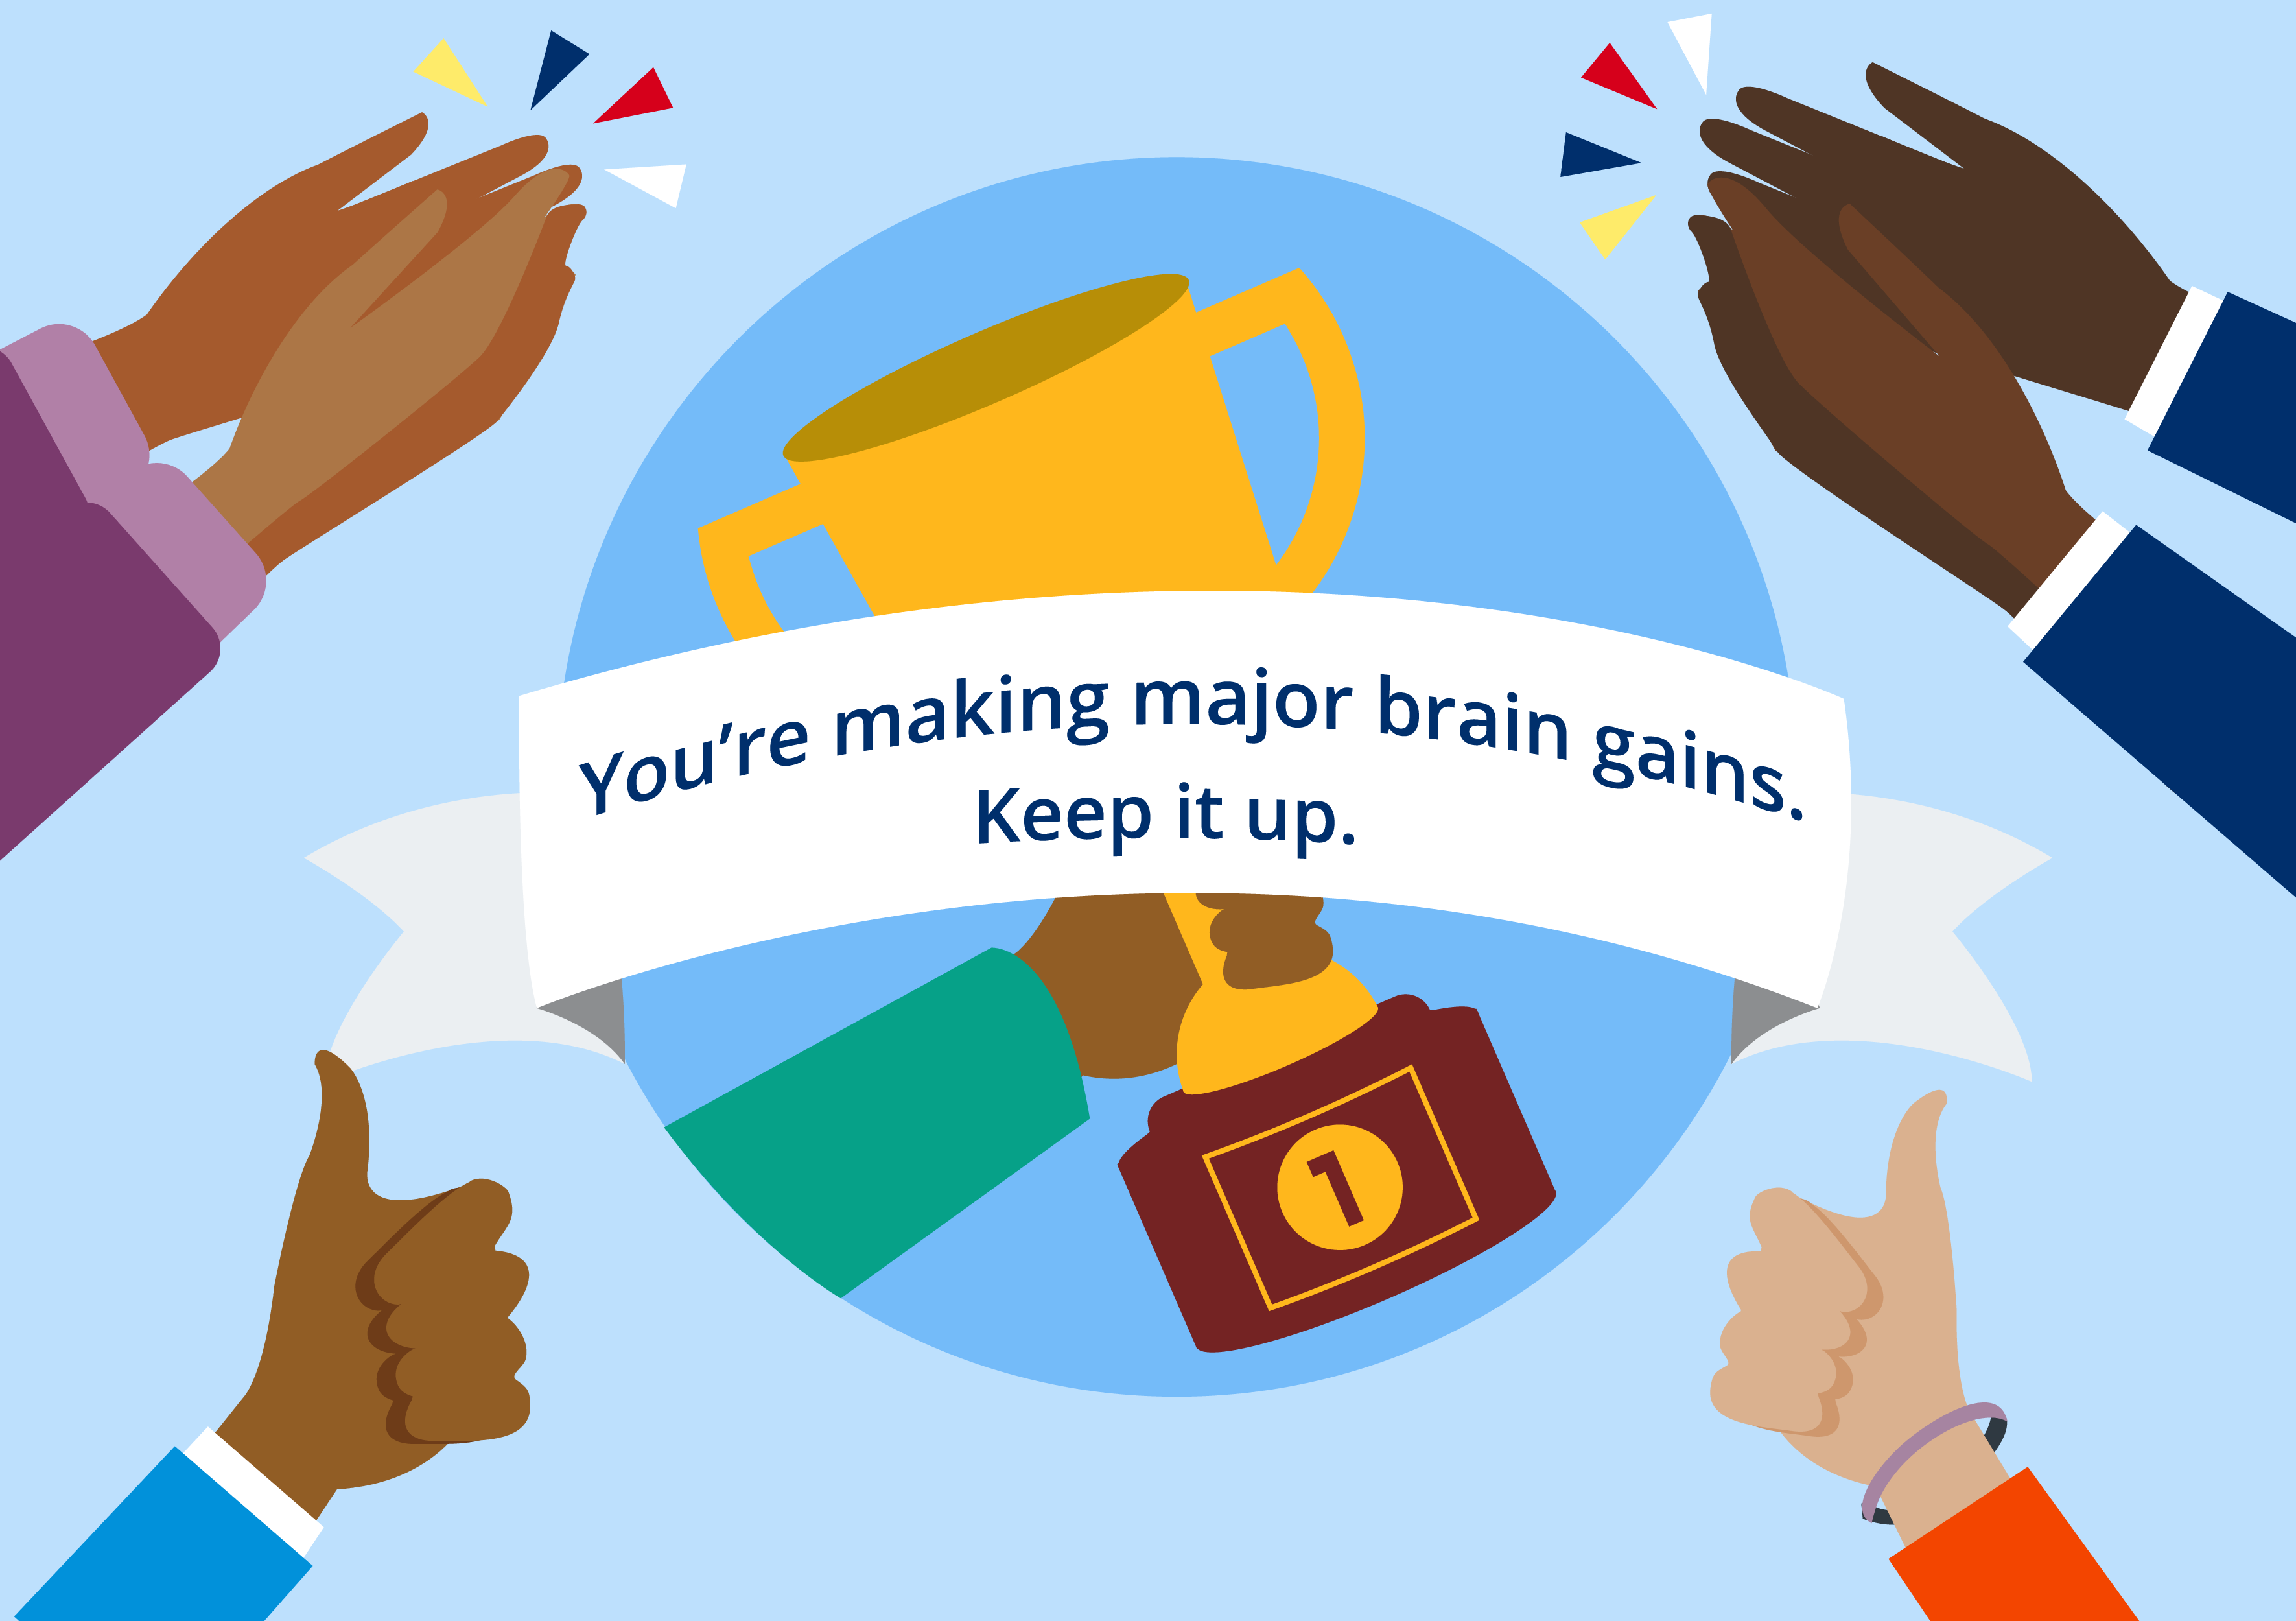 You're making major brain gains. Keep it up.